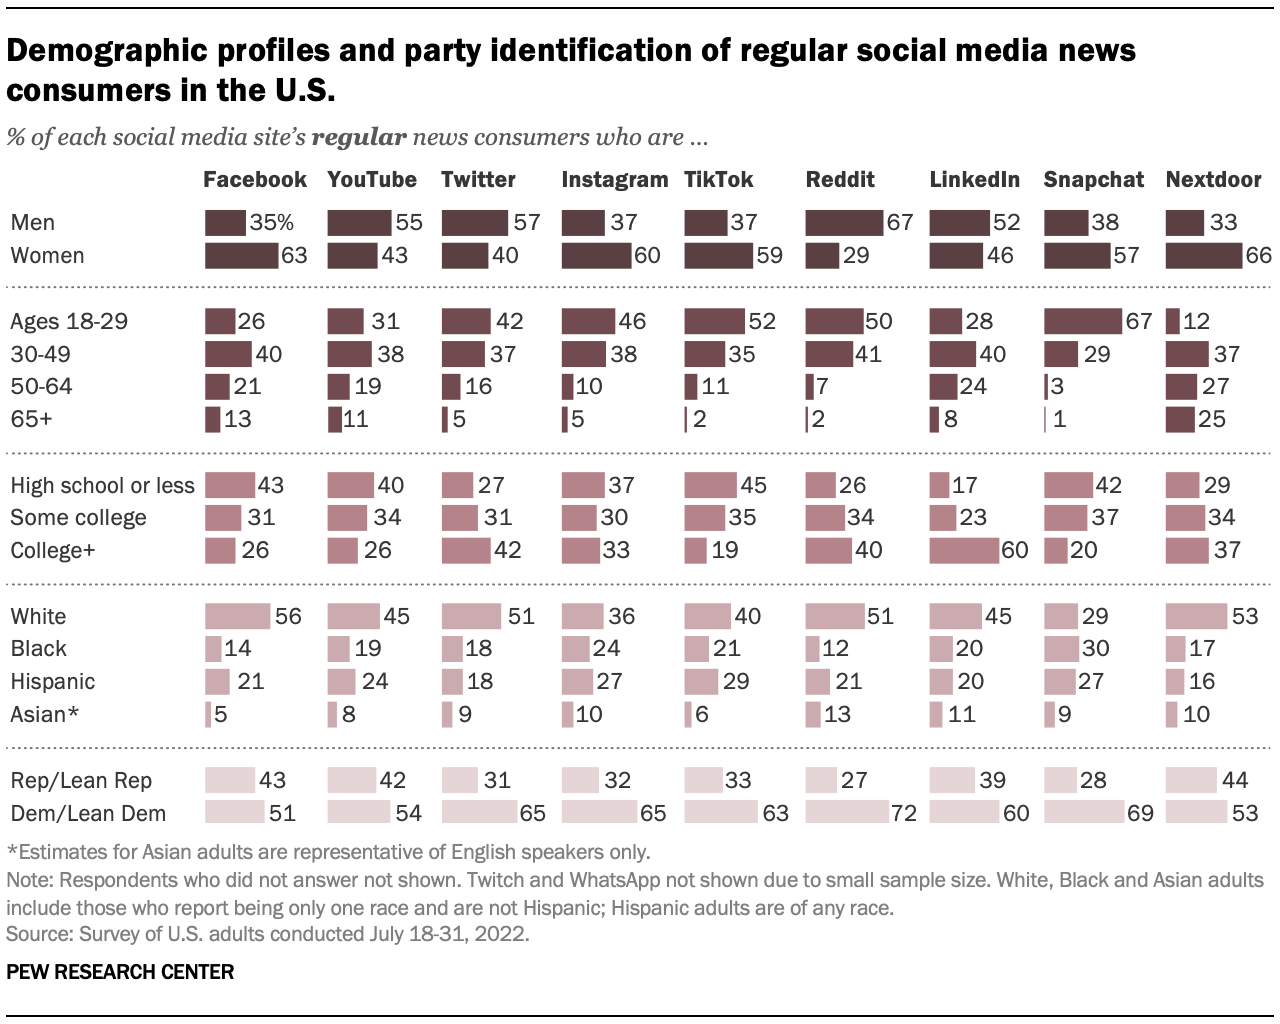 Demographic profiles and party identification of regular social media news consumers in the U.S.